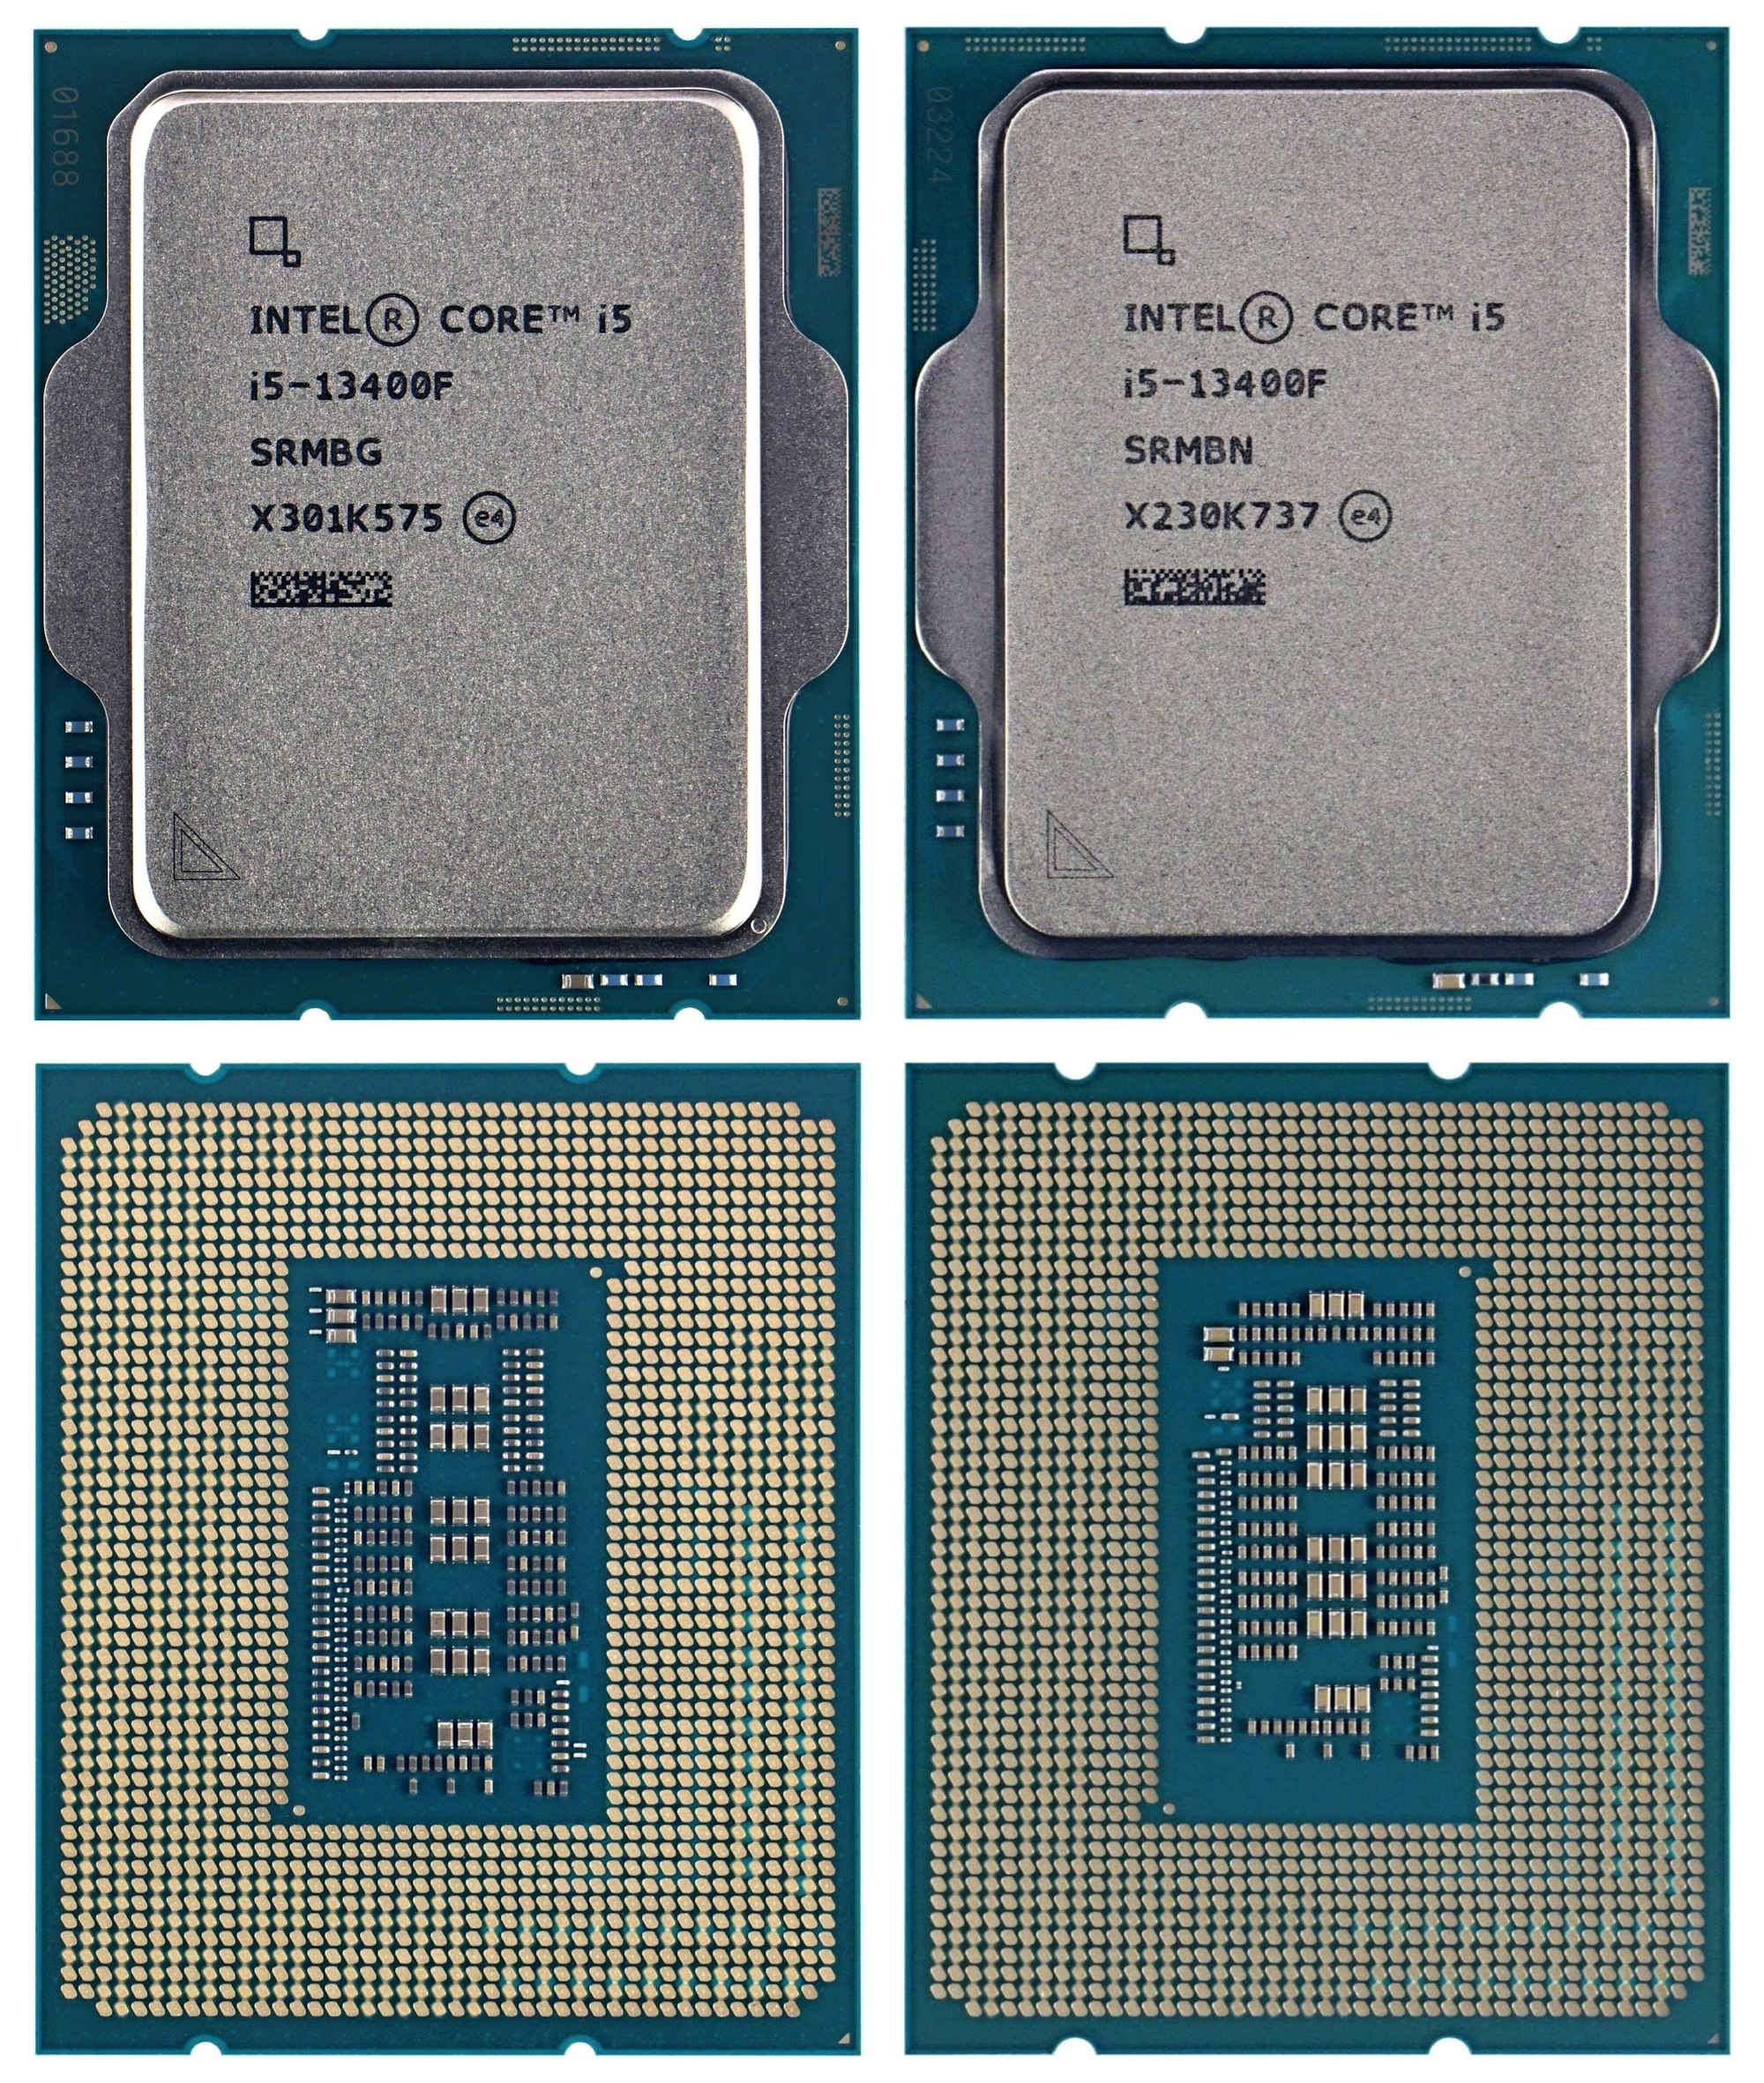 Intel Core i5-13400 CPU To Offer Performance Similar To i5-12600K